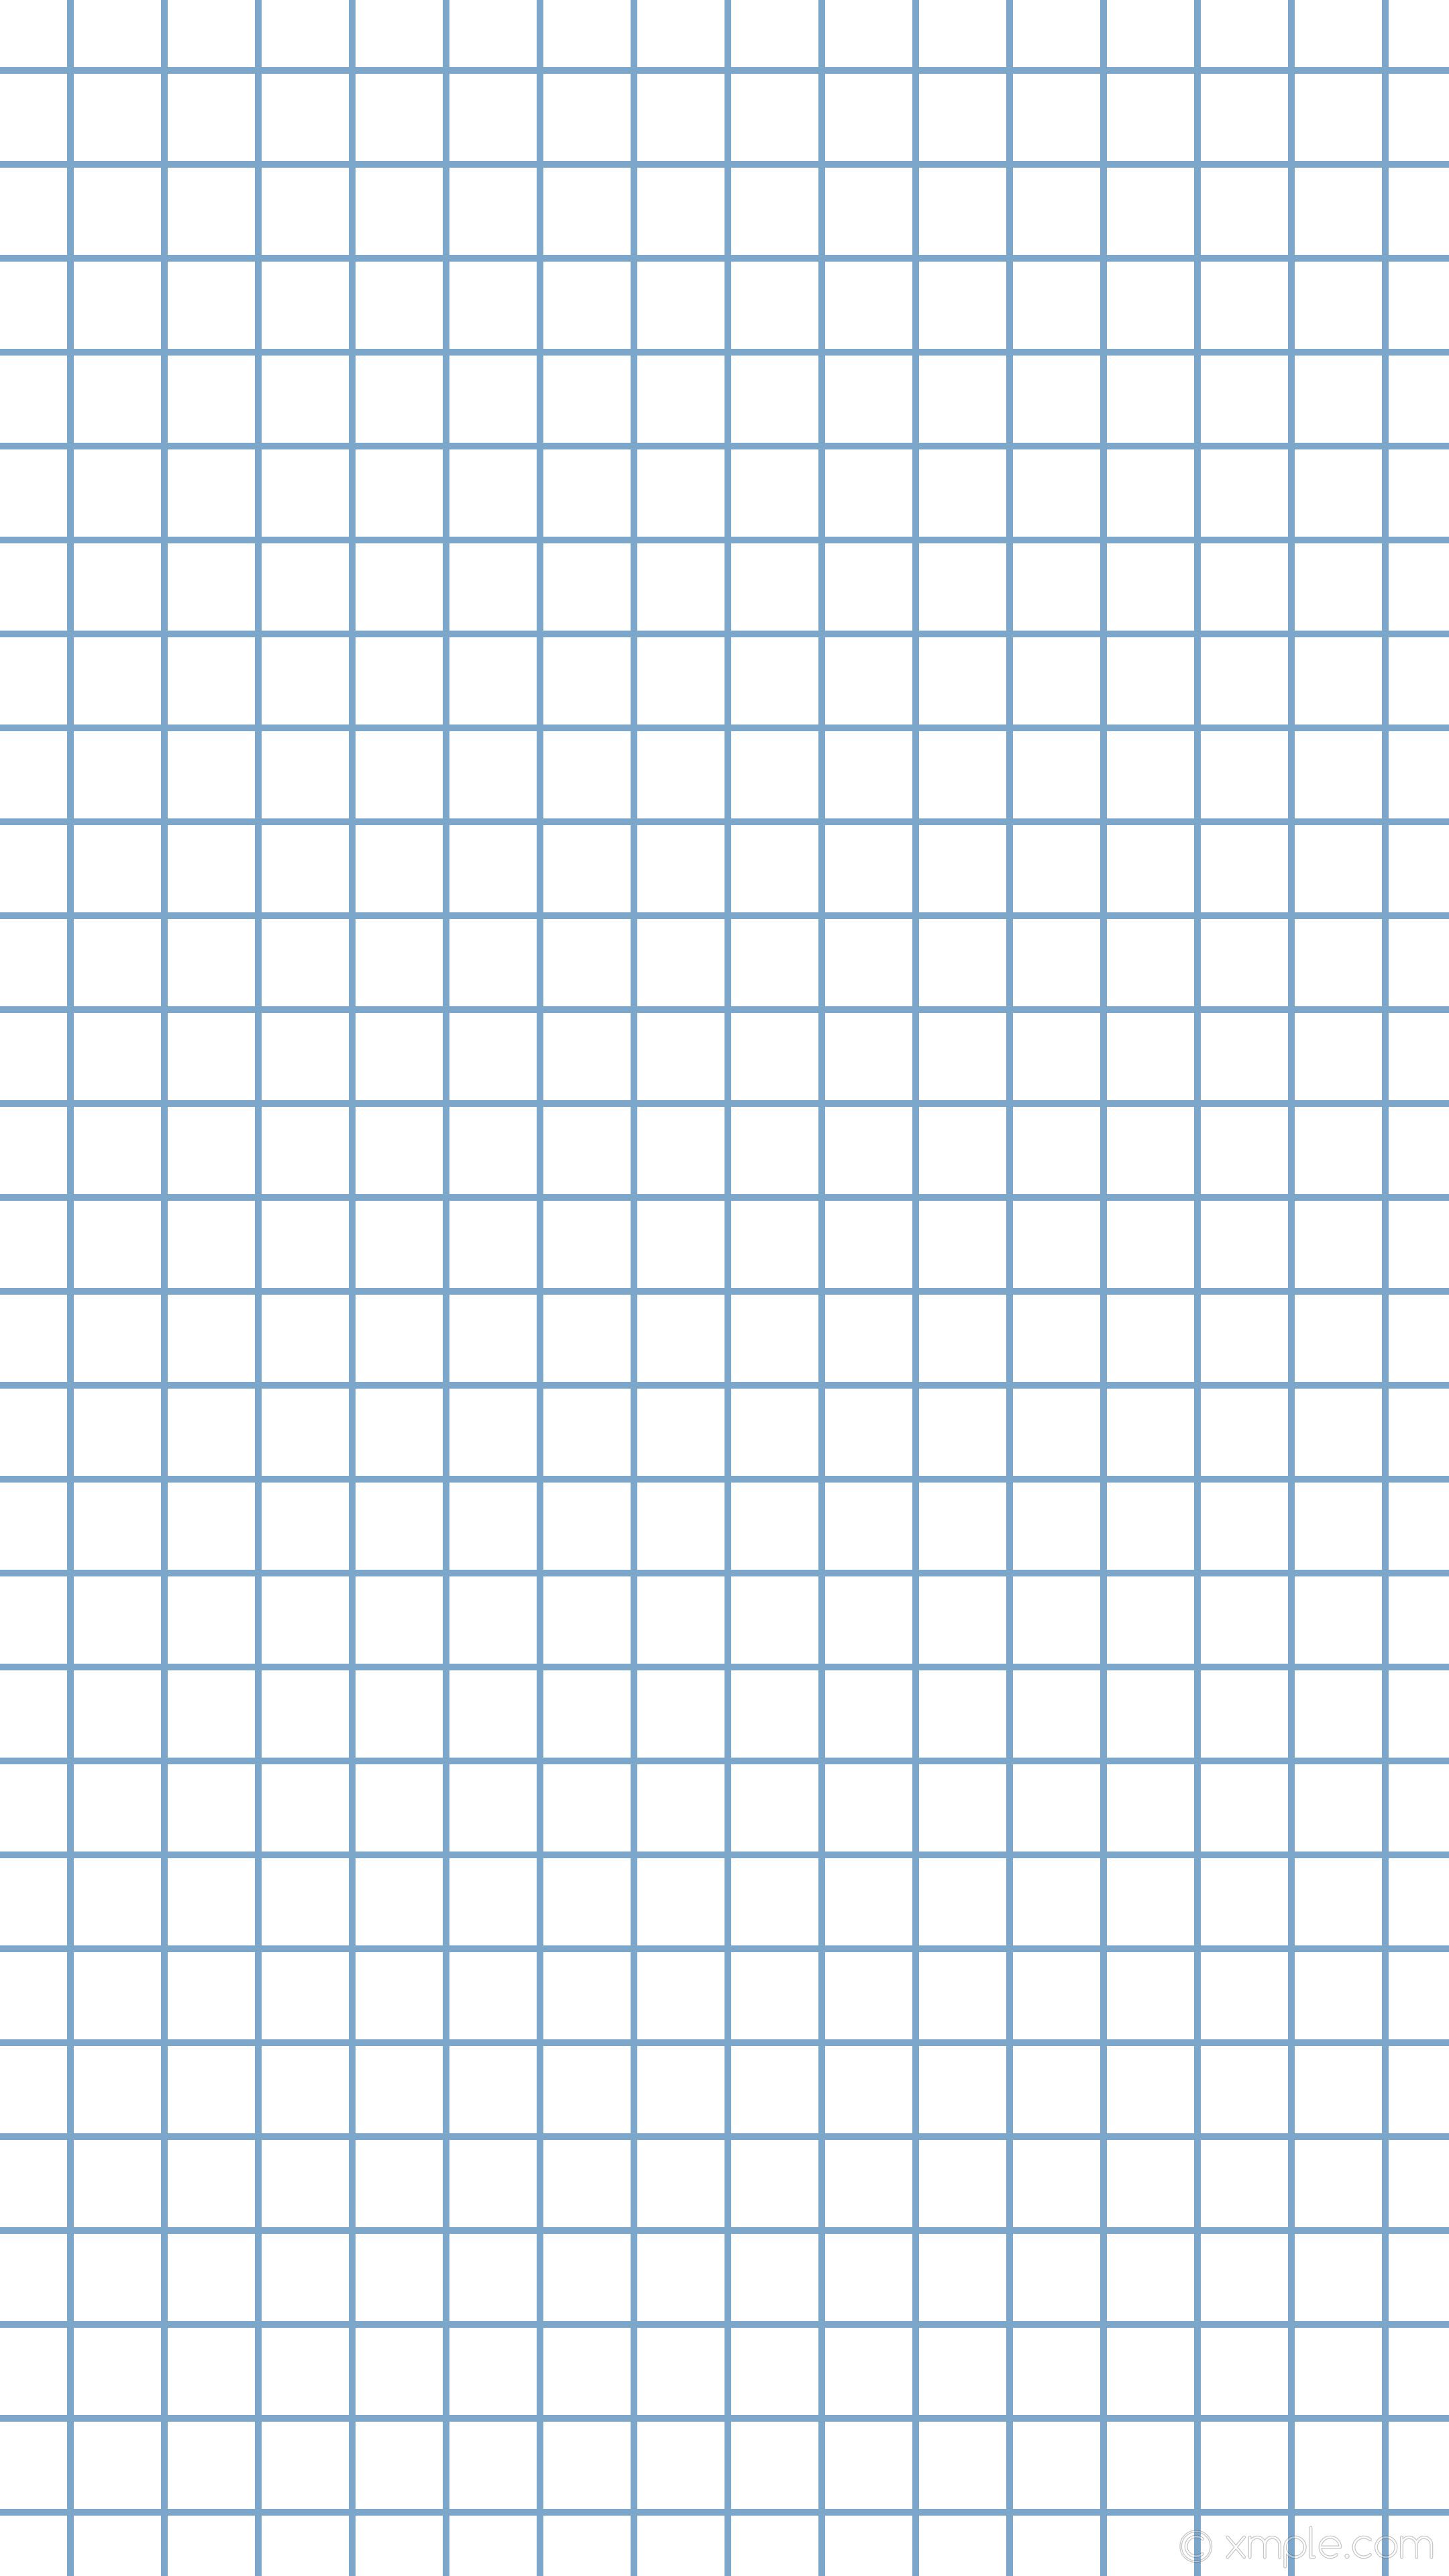 A blue grid pattern on a white background. - Grid